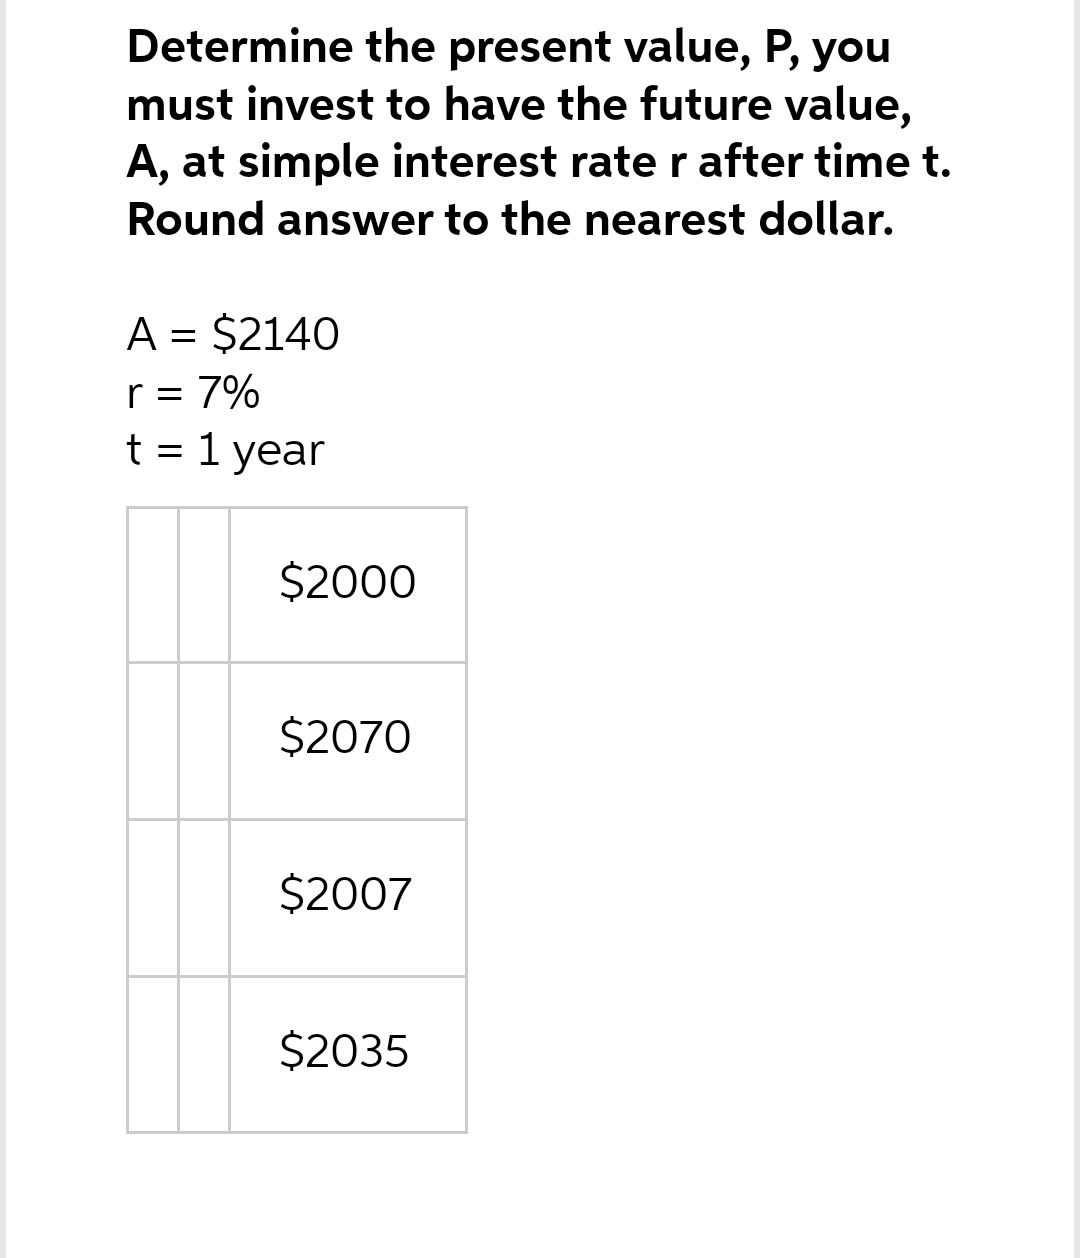 Determine the present value, P, you
must invest to have the future value,
A, at simple interest rate r after time t.
Round answer to the nearest dollar.
A = $2140
r = 7%
t = 1 year
$2000
$2070
$2007
$2035